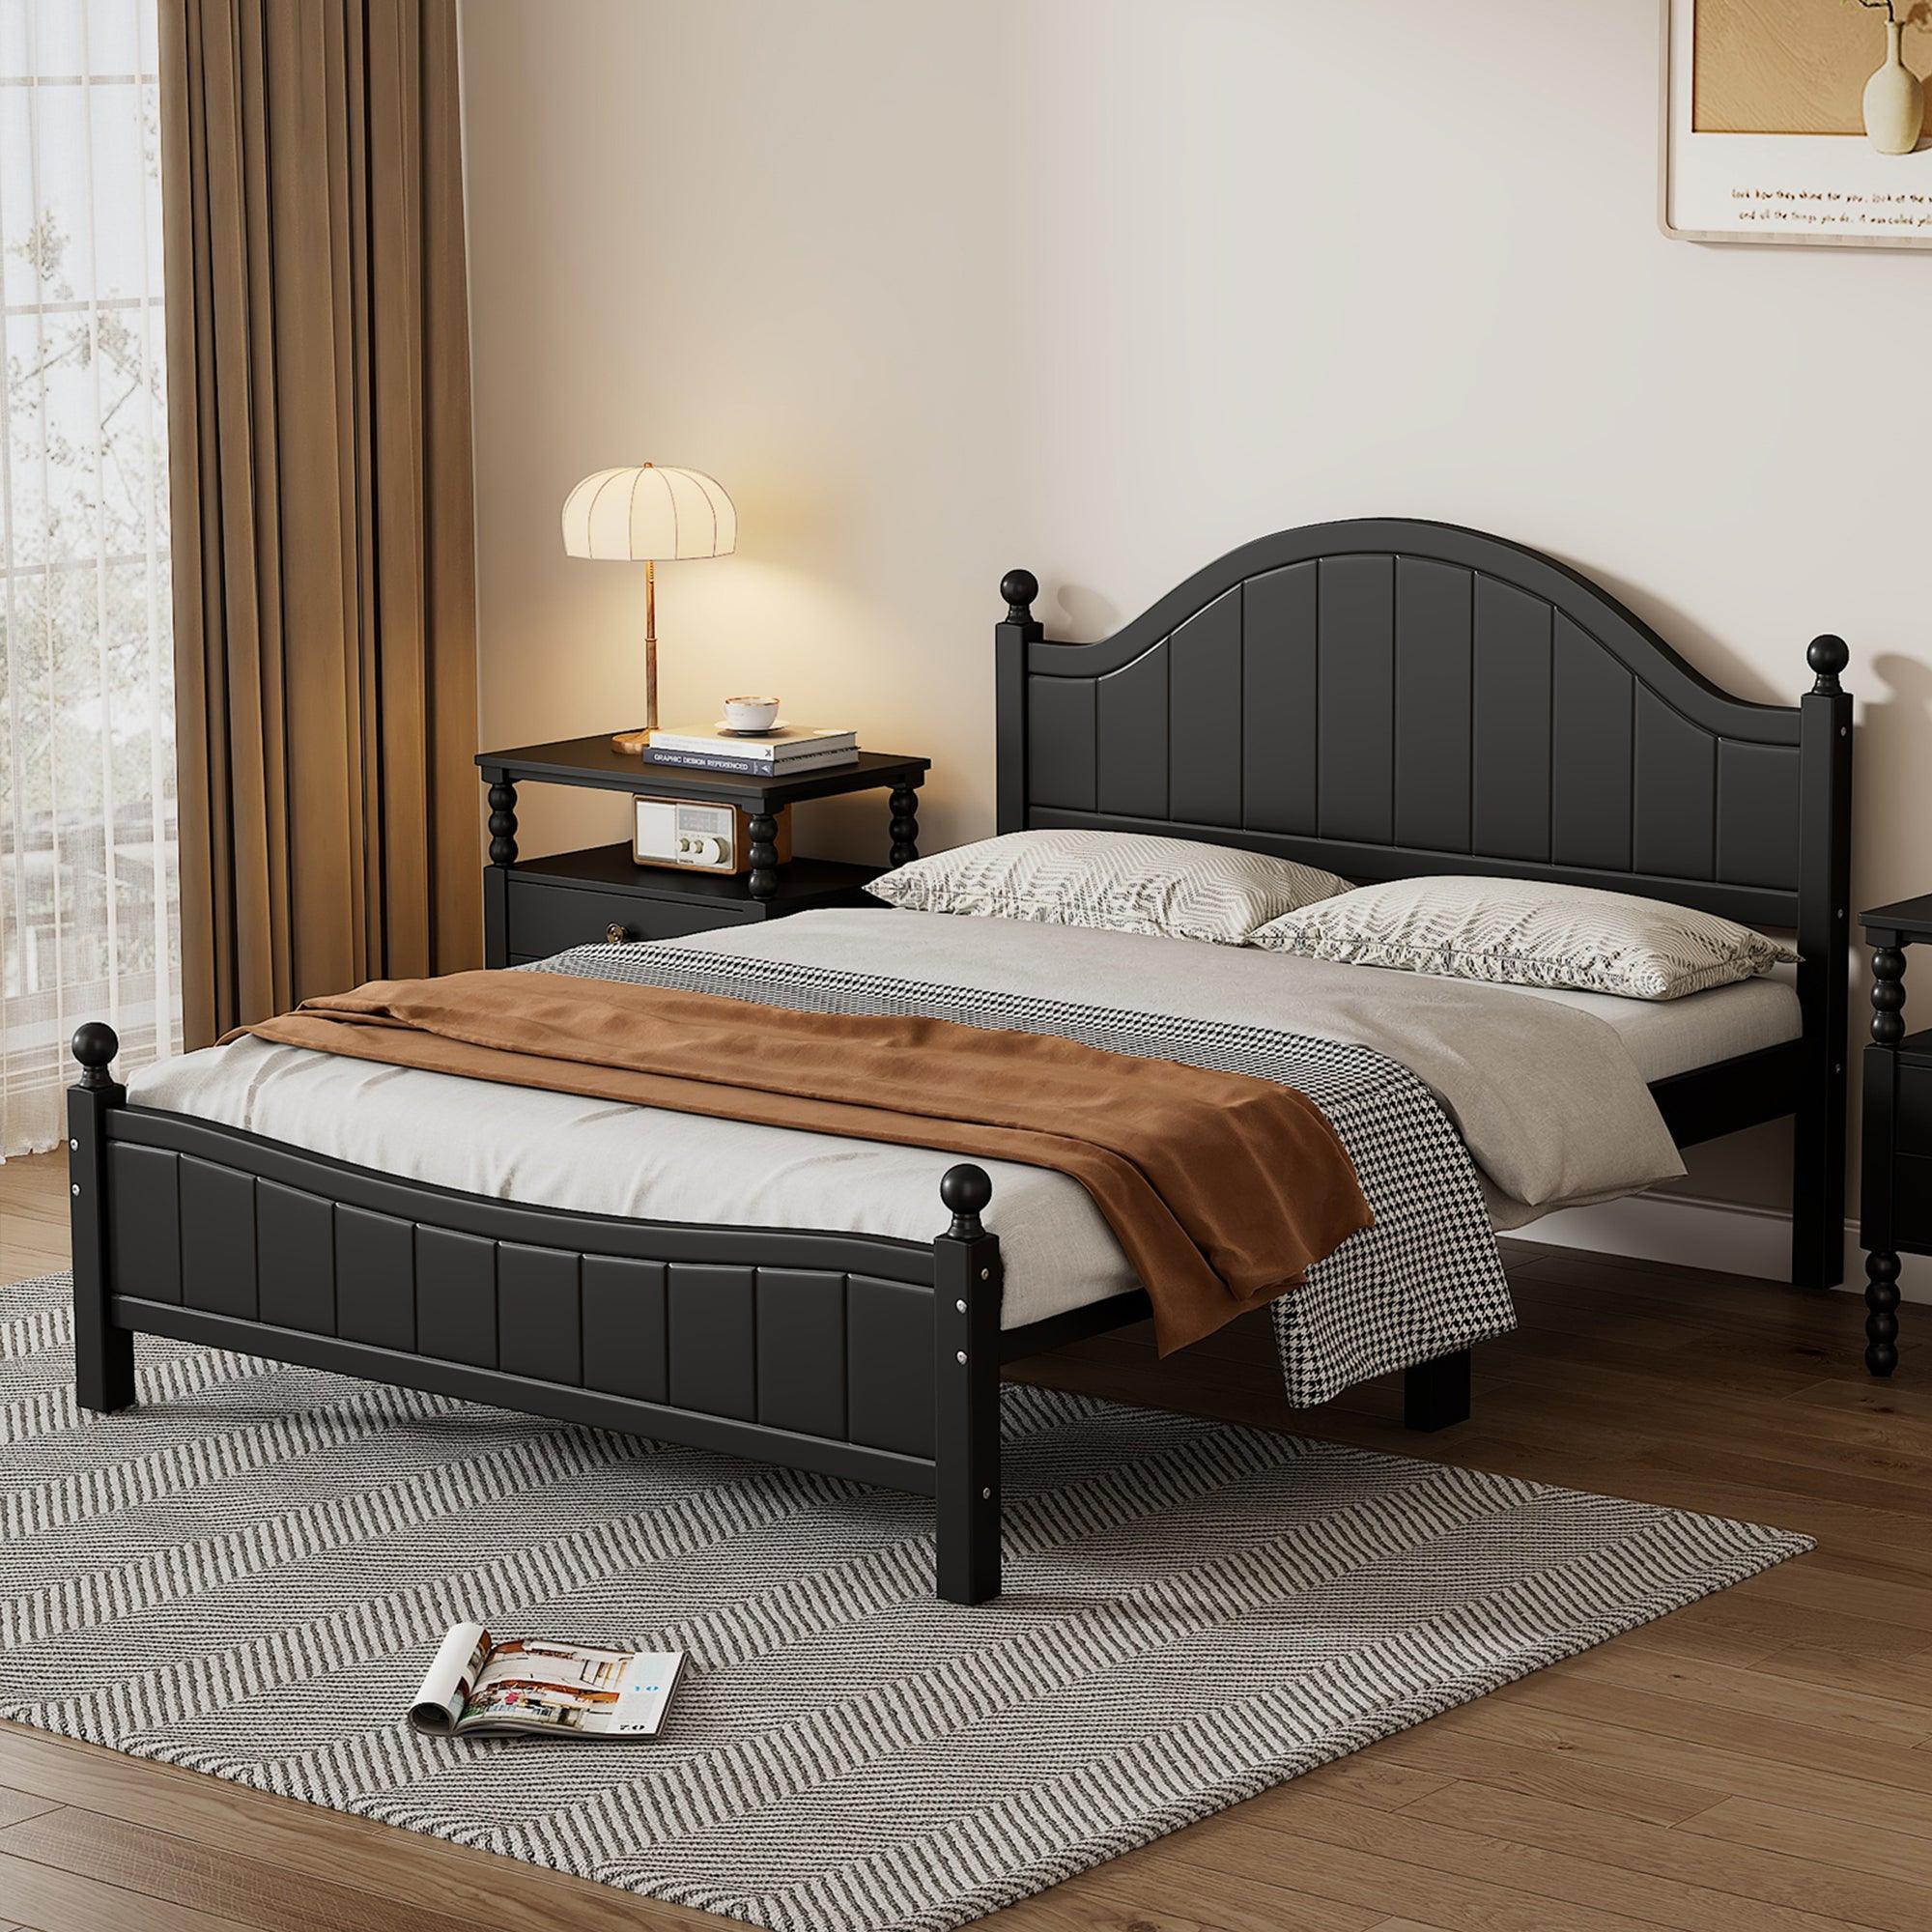 🆓🚛 Traditional Concise Style Black Solid Wood Platform Bed, No Need Box Spring, Queen